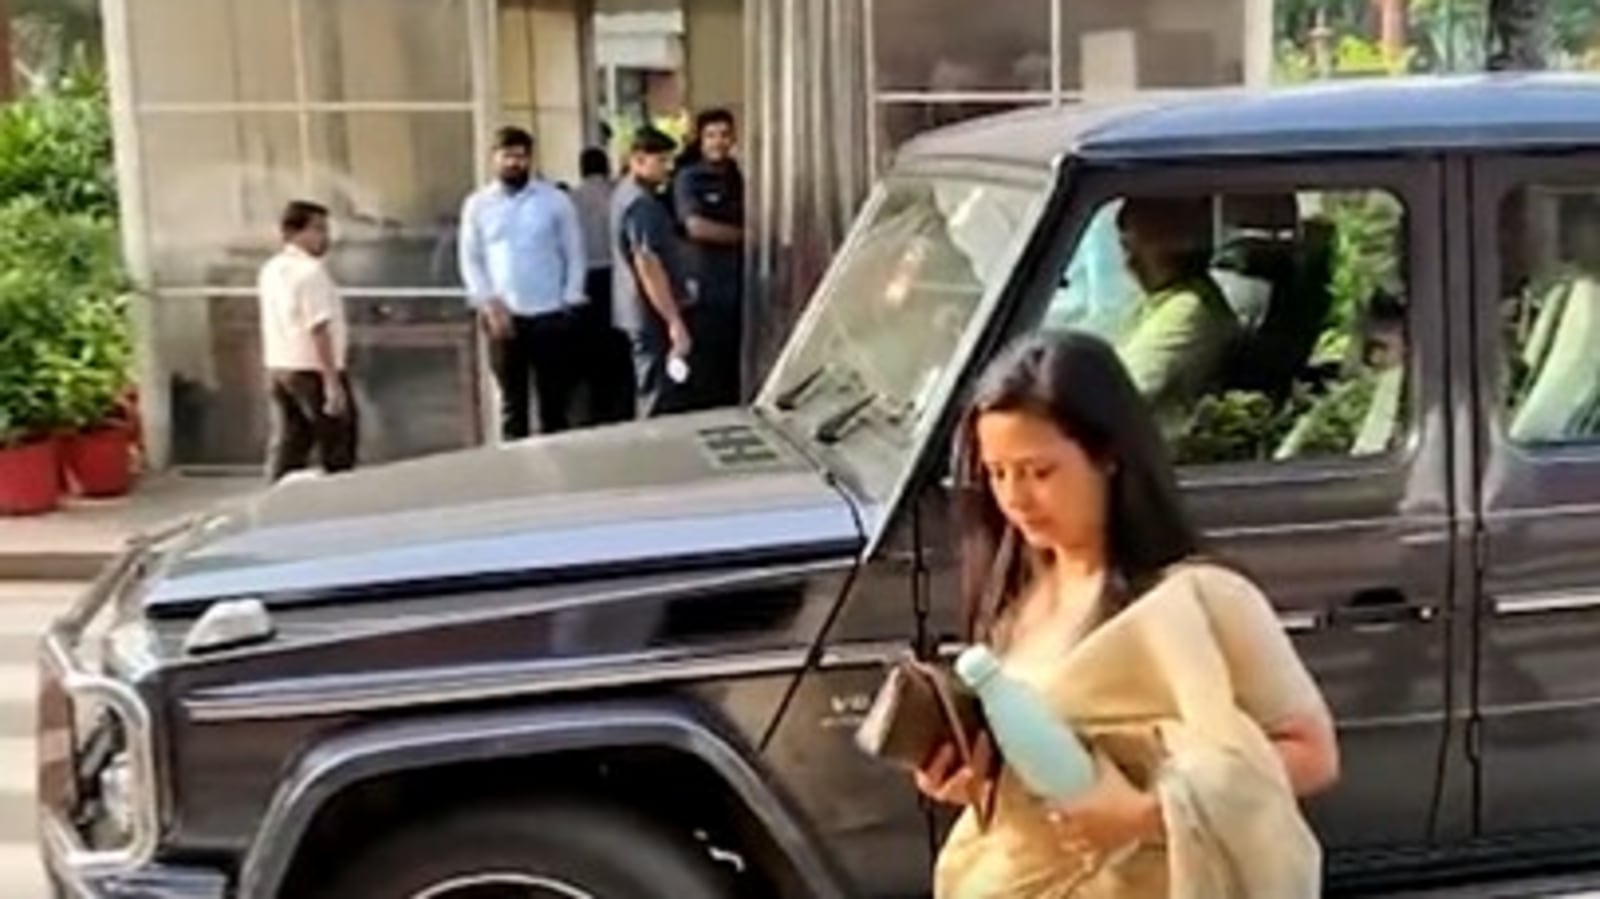 Twitterverse loves Mahua Moitra. But who is she and what has she done?